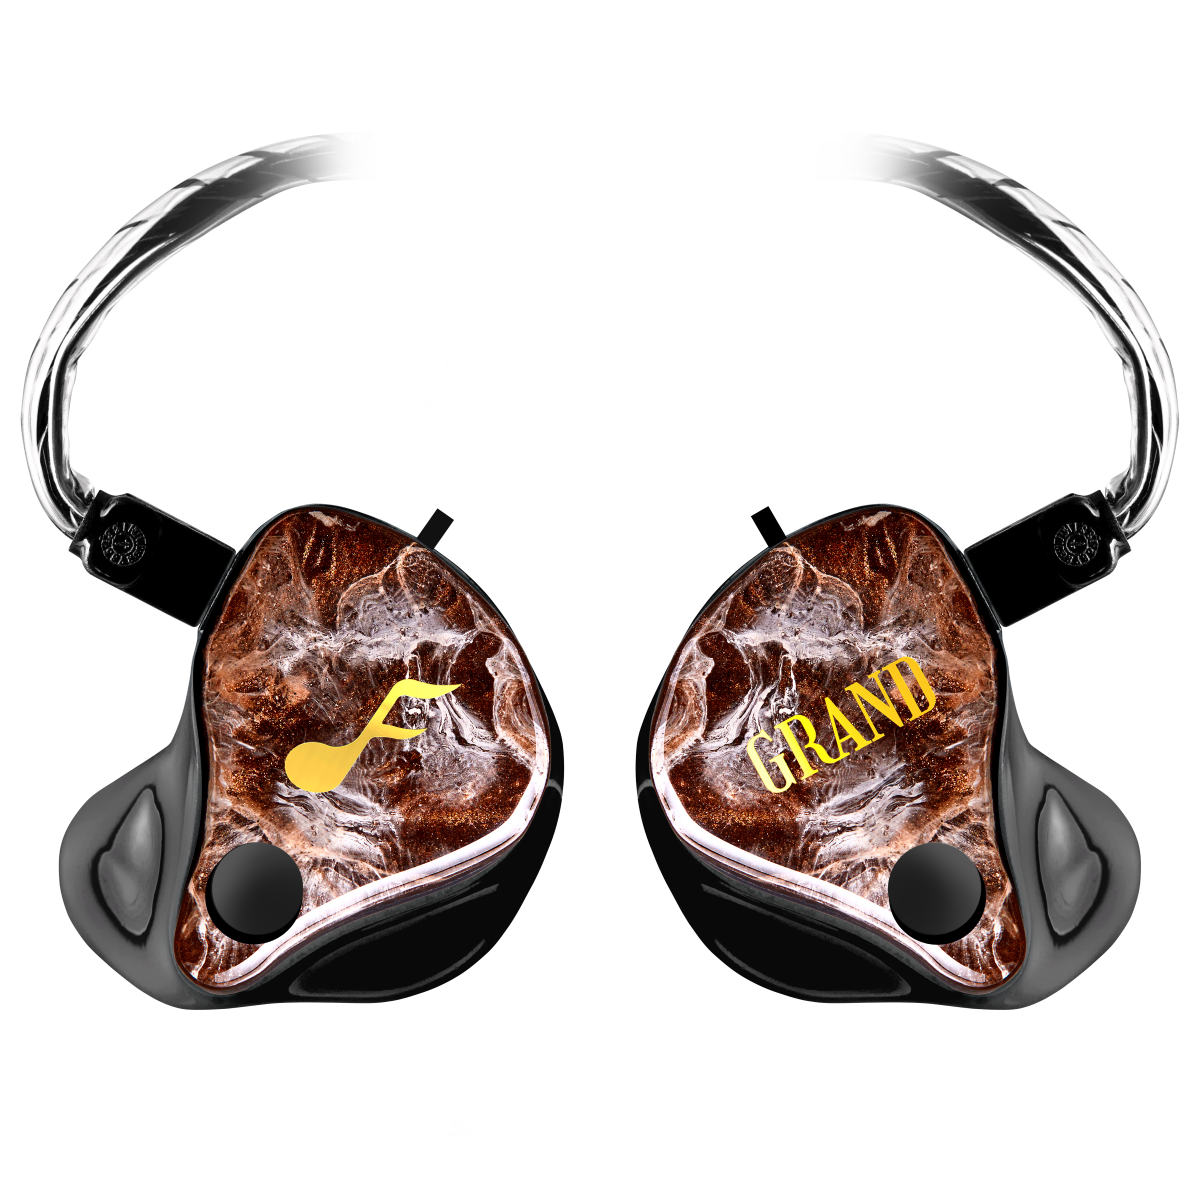 GRAND Maestro Custom IEM - Prices from 4821.00 to 4915.00